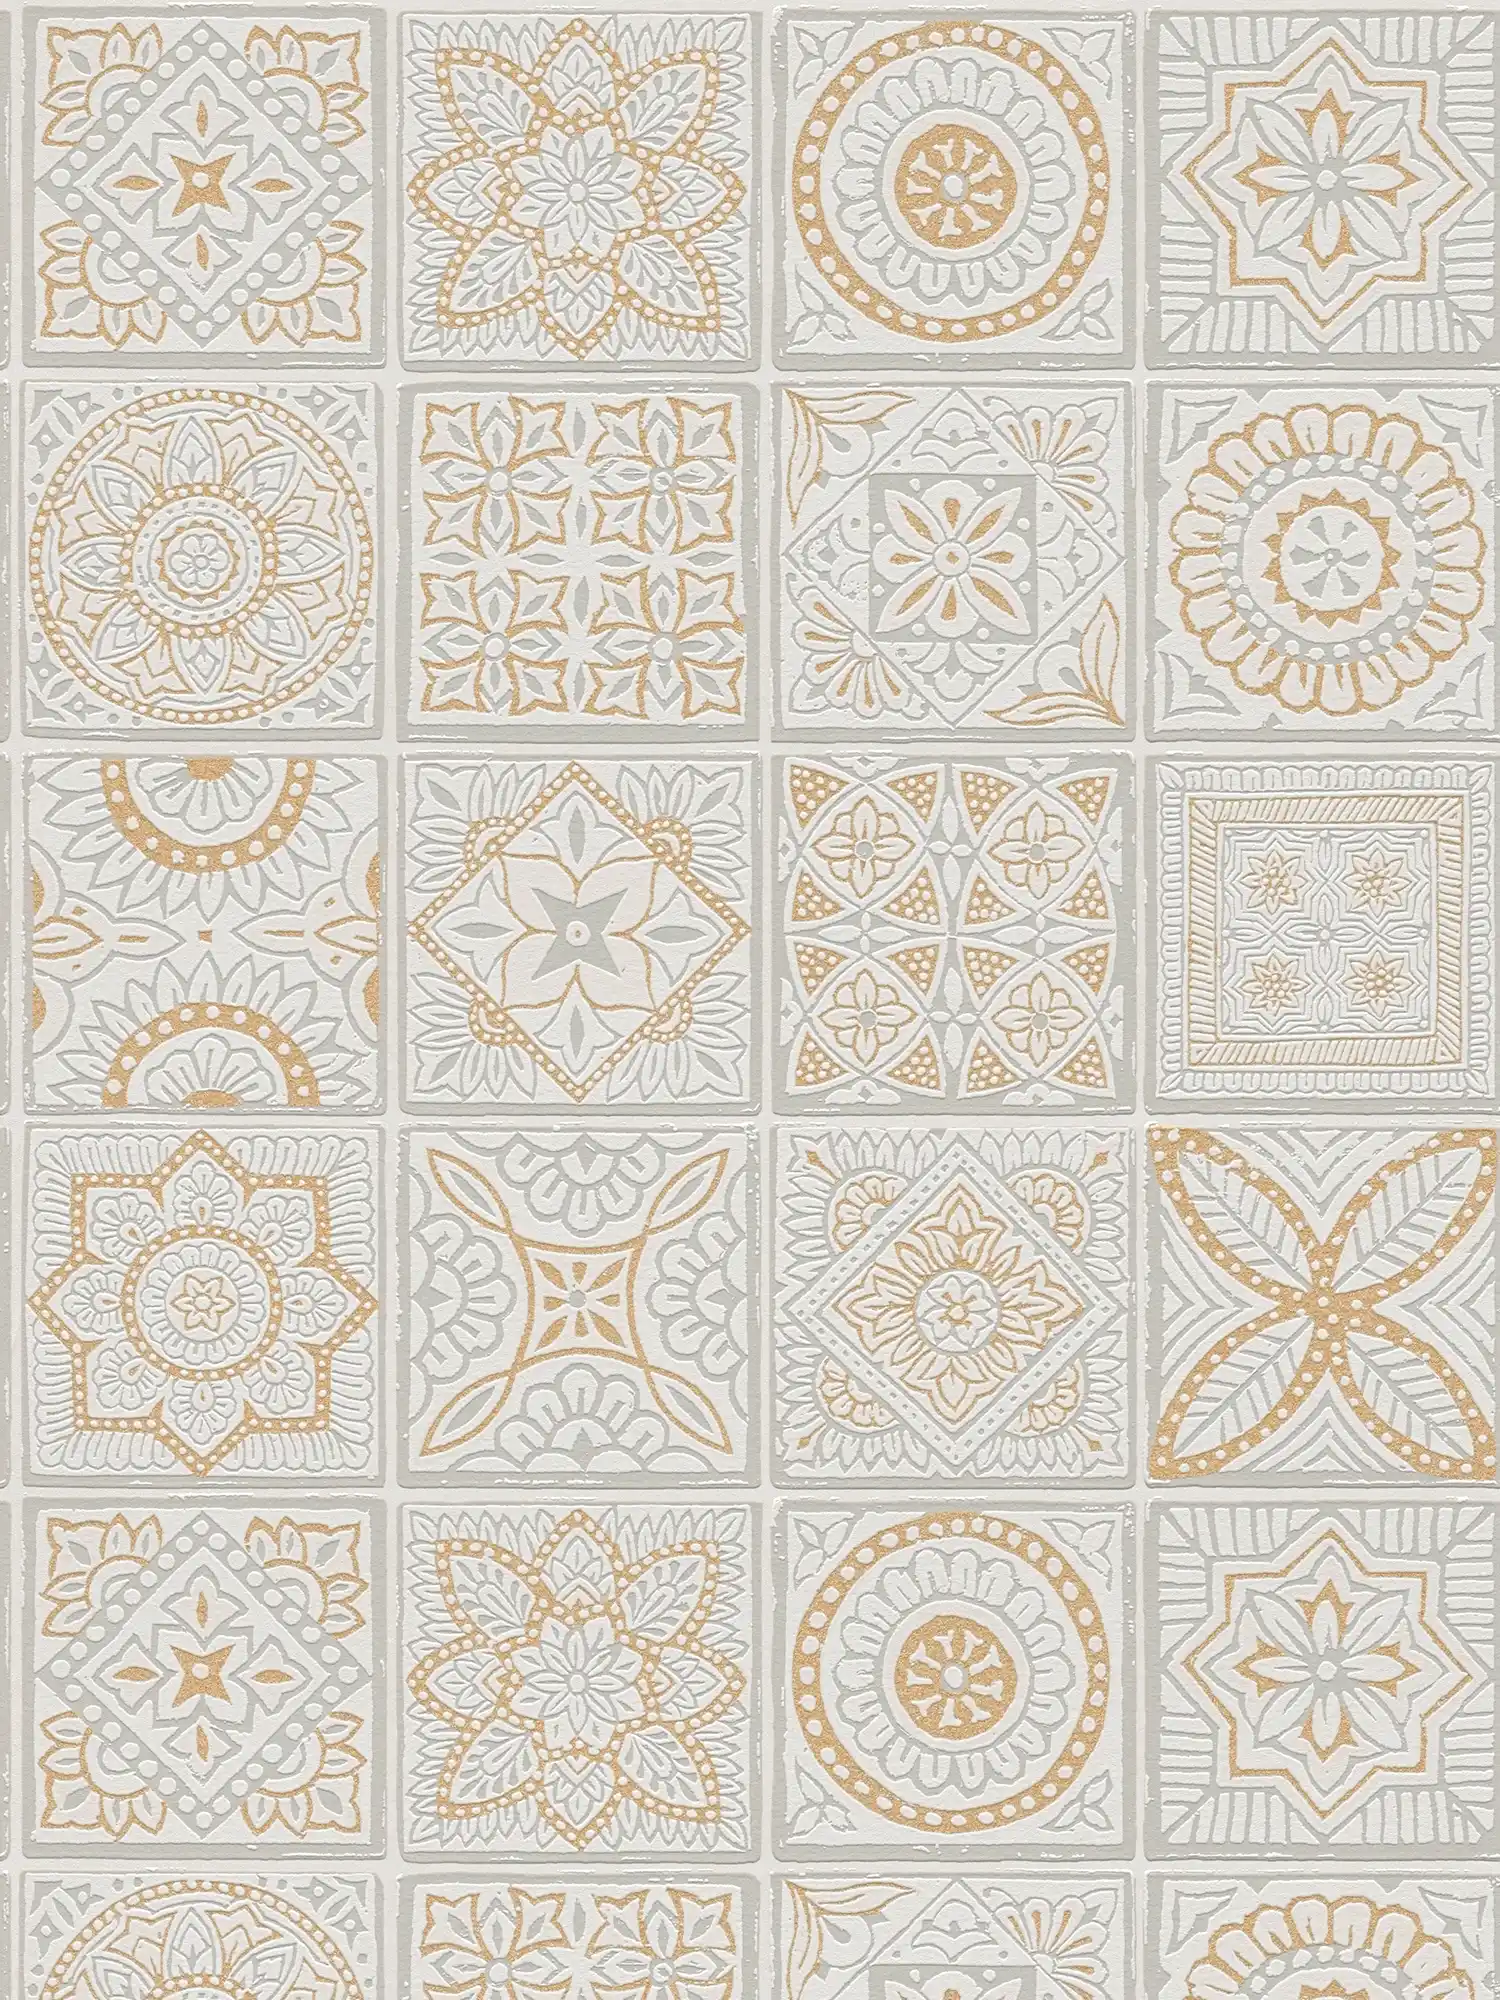 Tile look non-woven wallpaper with floral mosaics - gold, grey, white
